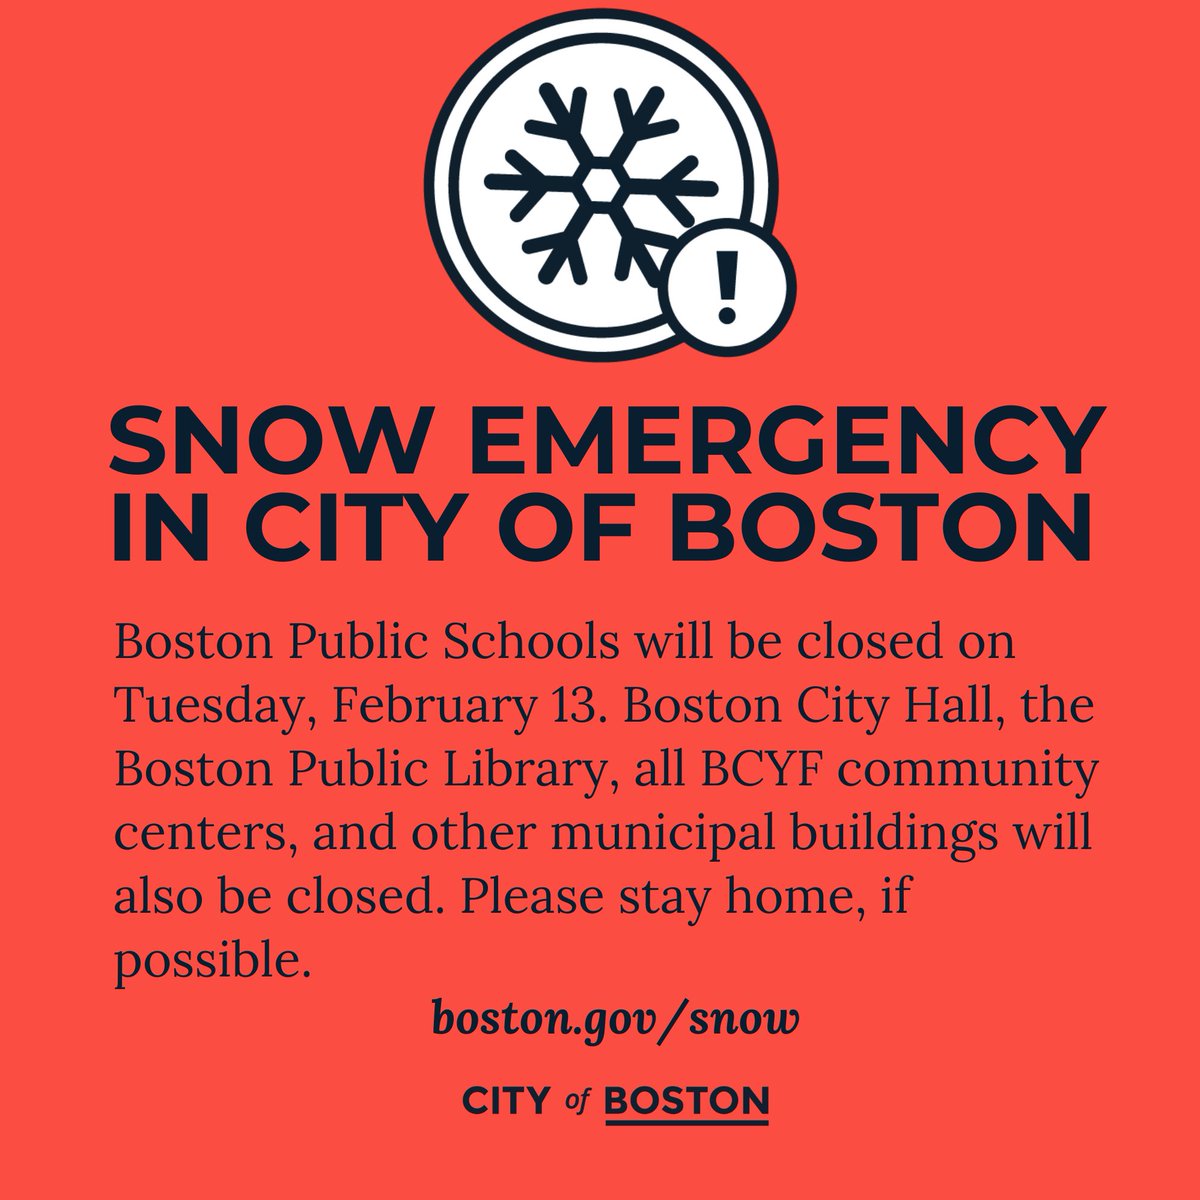 Boston Public Schools will be closed on Tuesday, February 13. Boston City Hall, the Boston Public Library, all BCYF community centers, and other municipal buildings will also be closed. Please stay home, if possible. Visit boston.gov/snow to learn more.